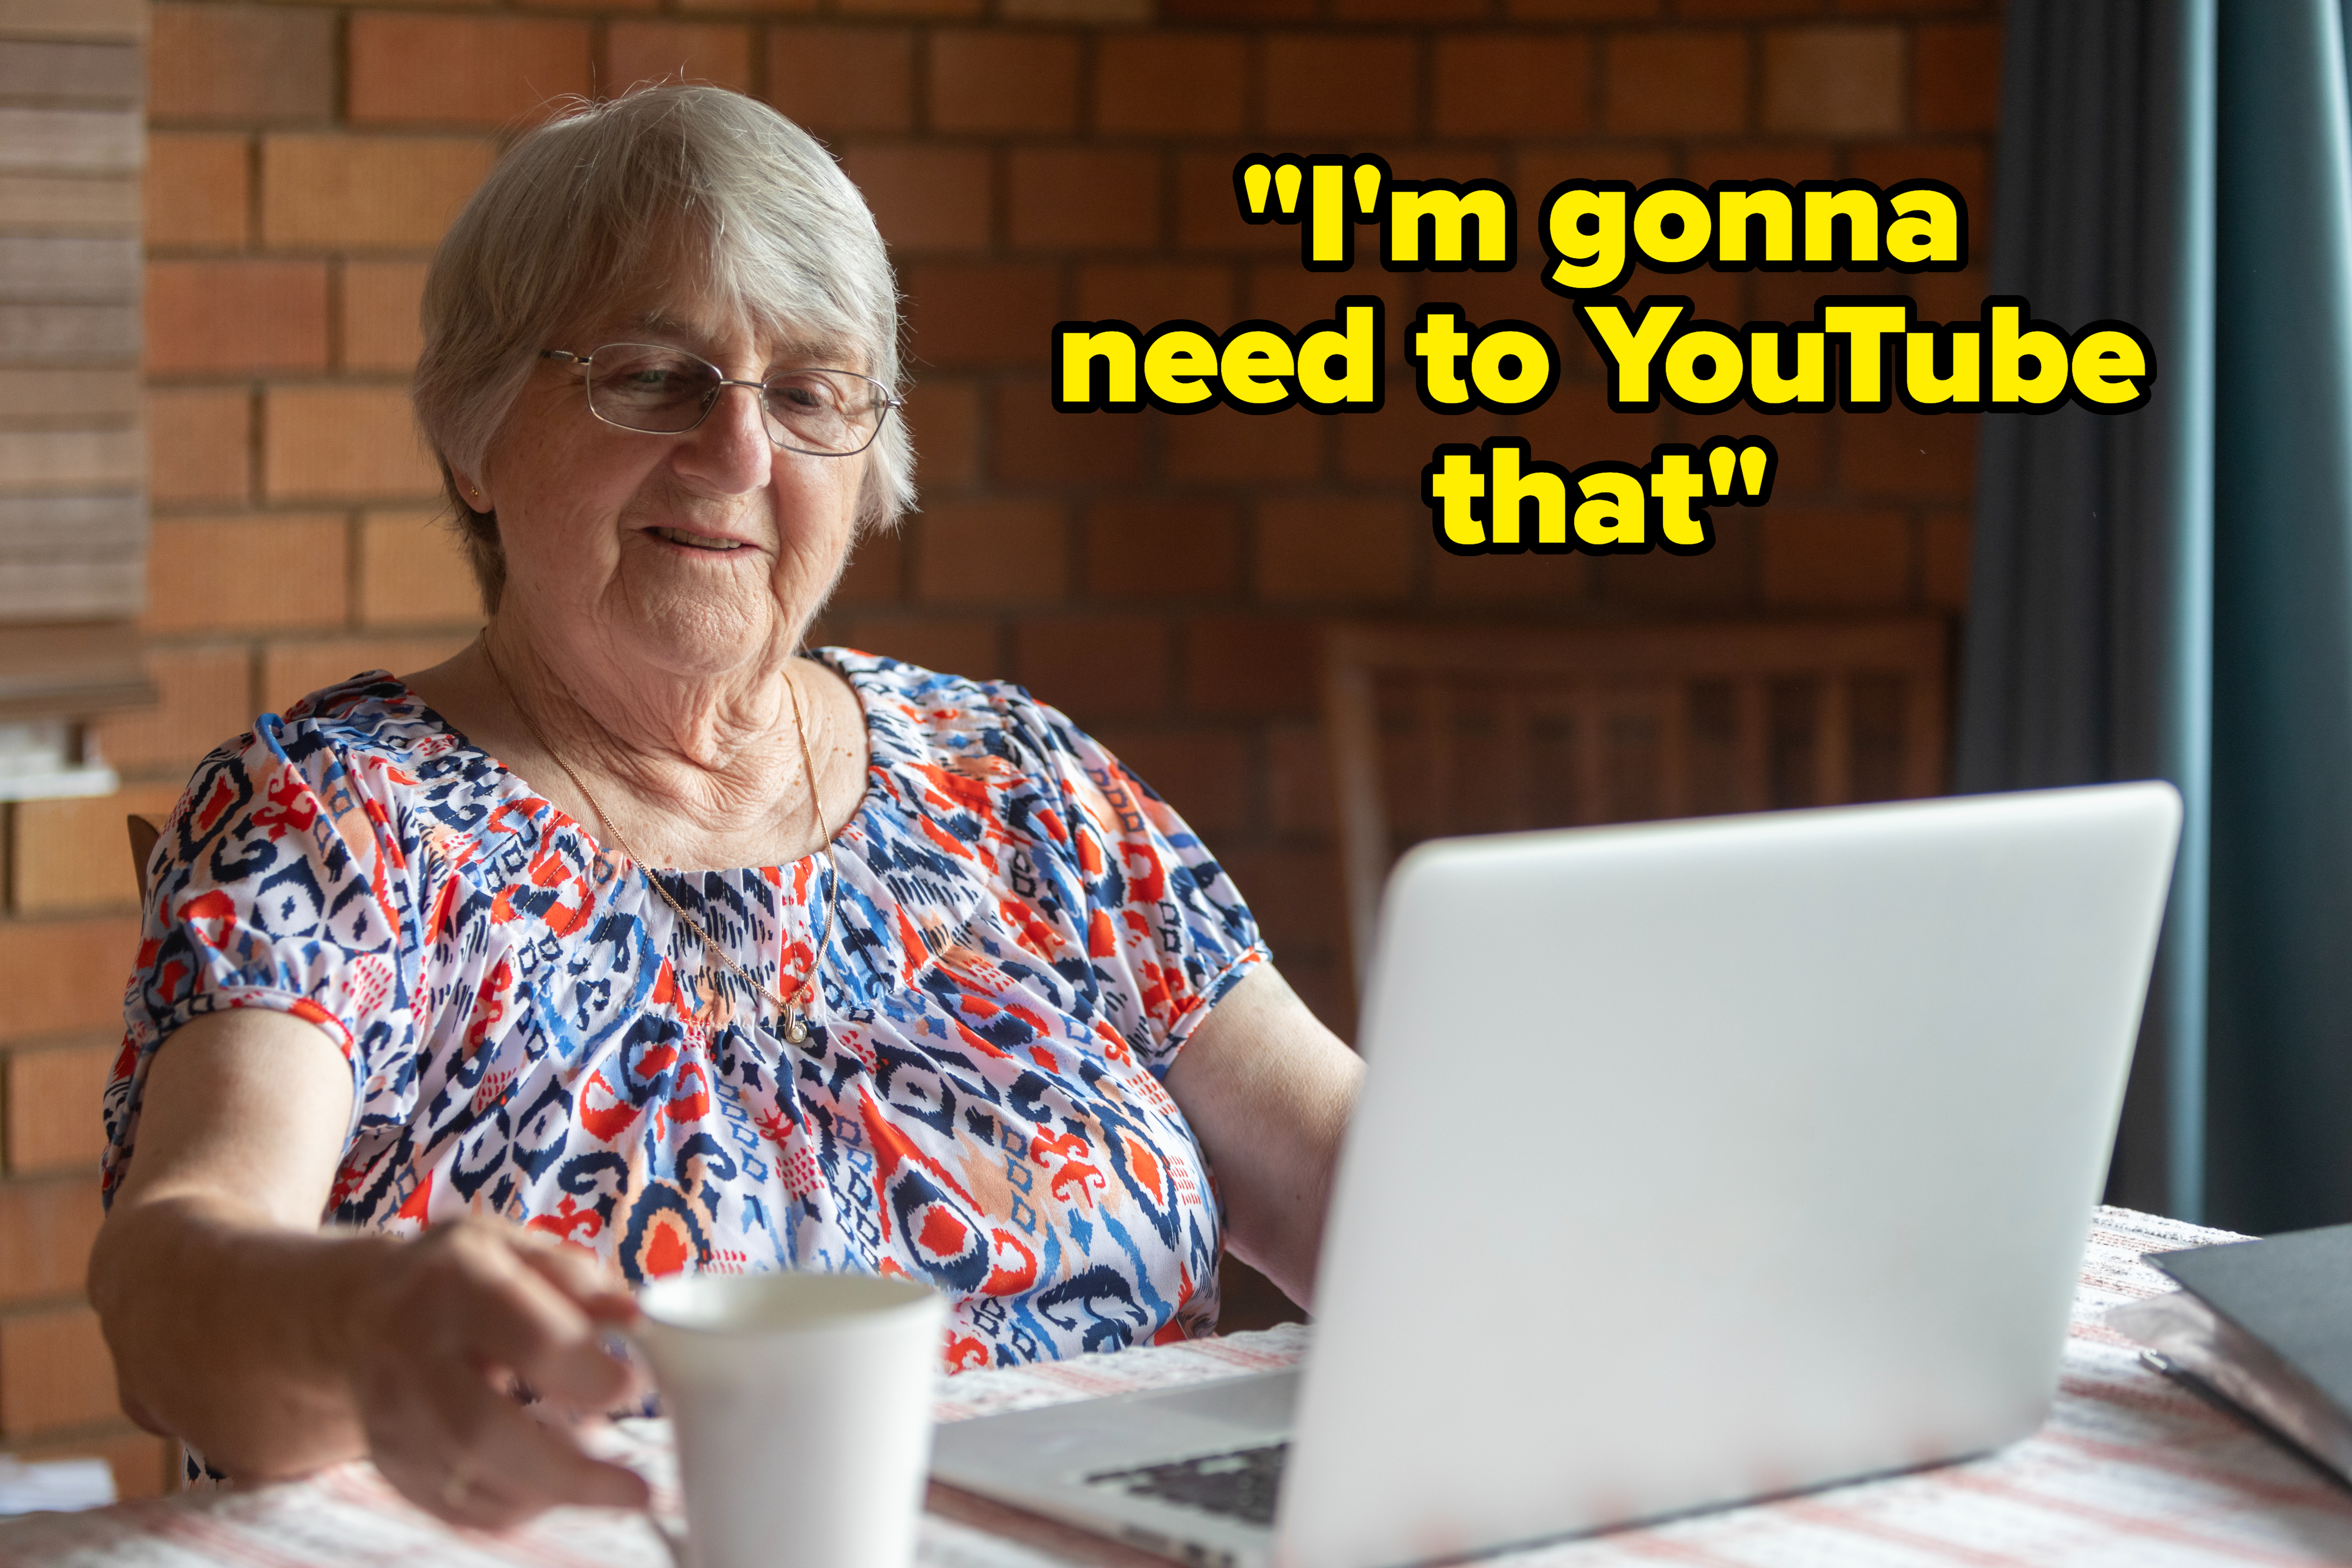 Elderly woman using a laptop at a table with a coffee cup, smiling slightly, in casual printed attire